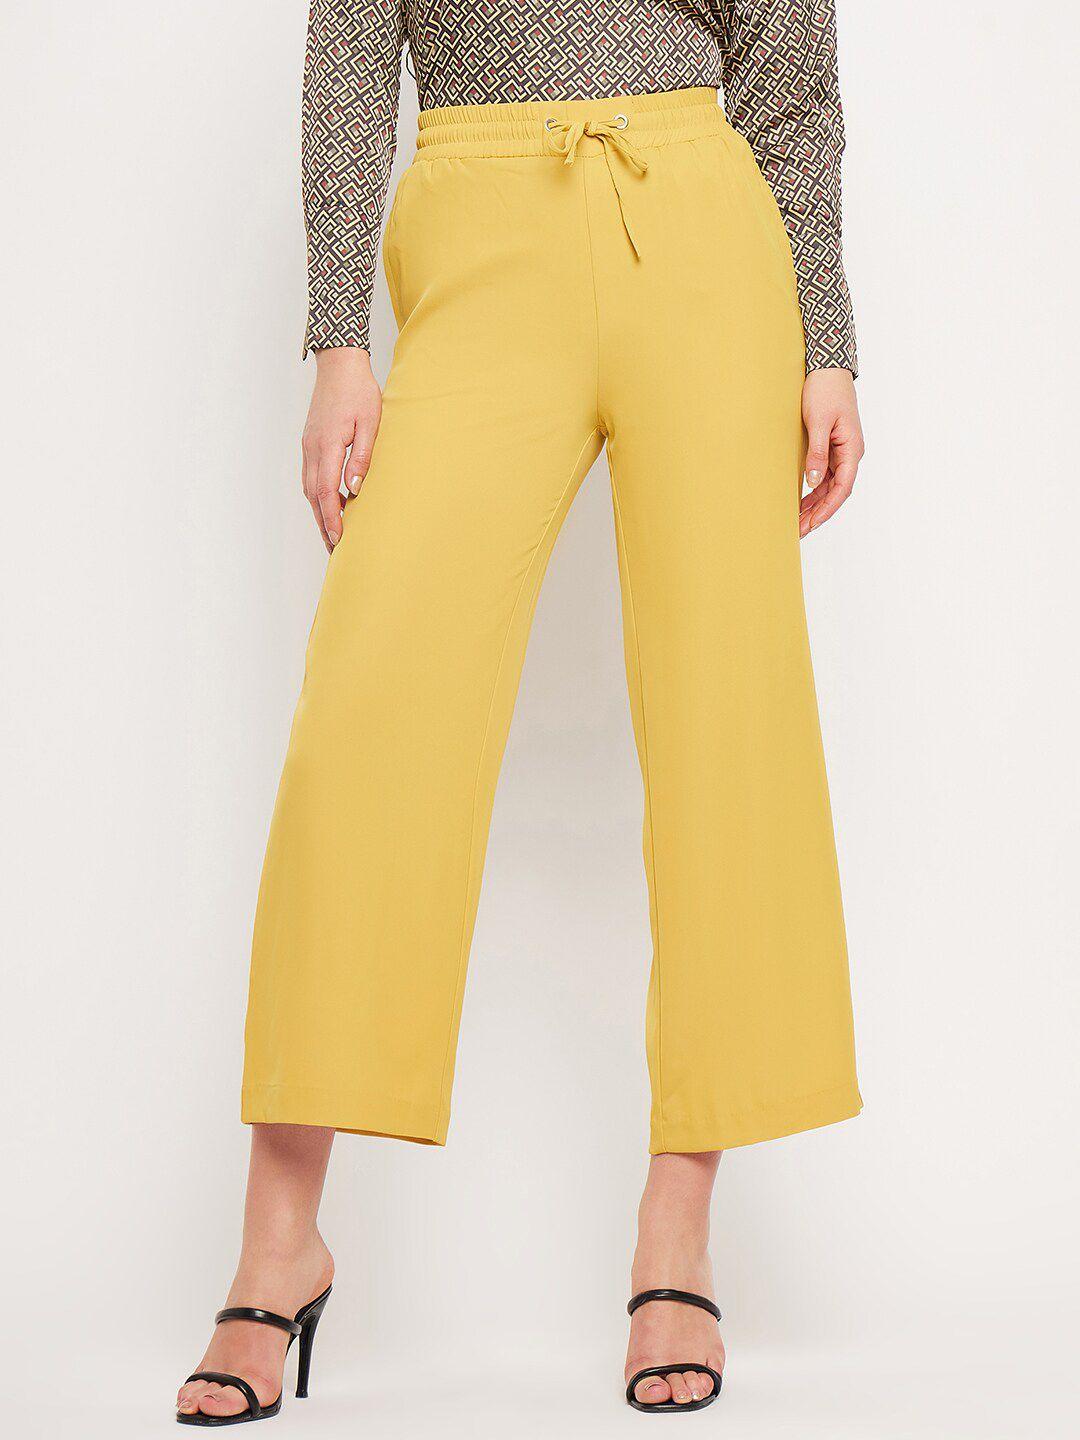 camla women mid rise culottes trousers